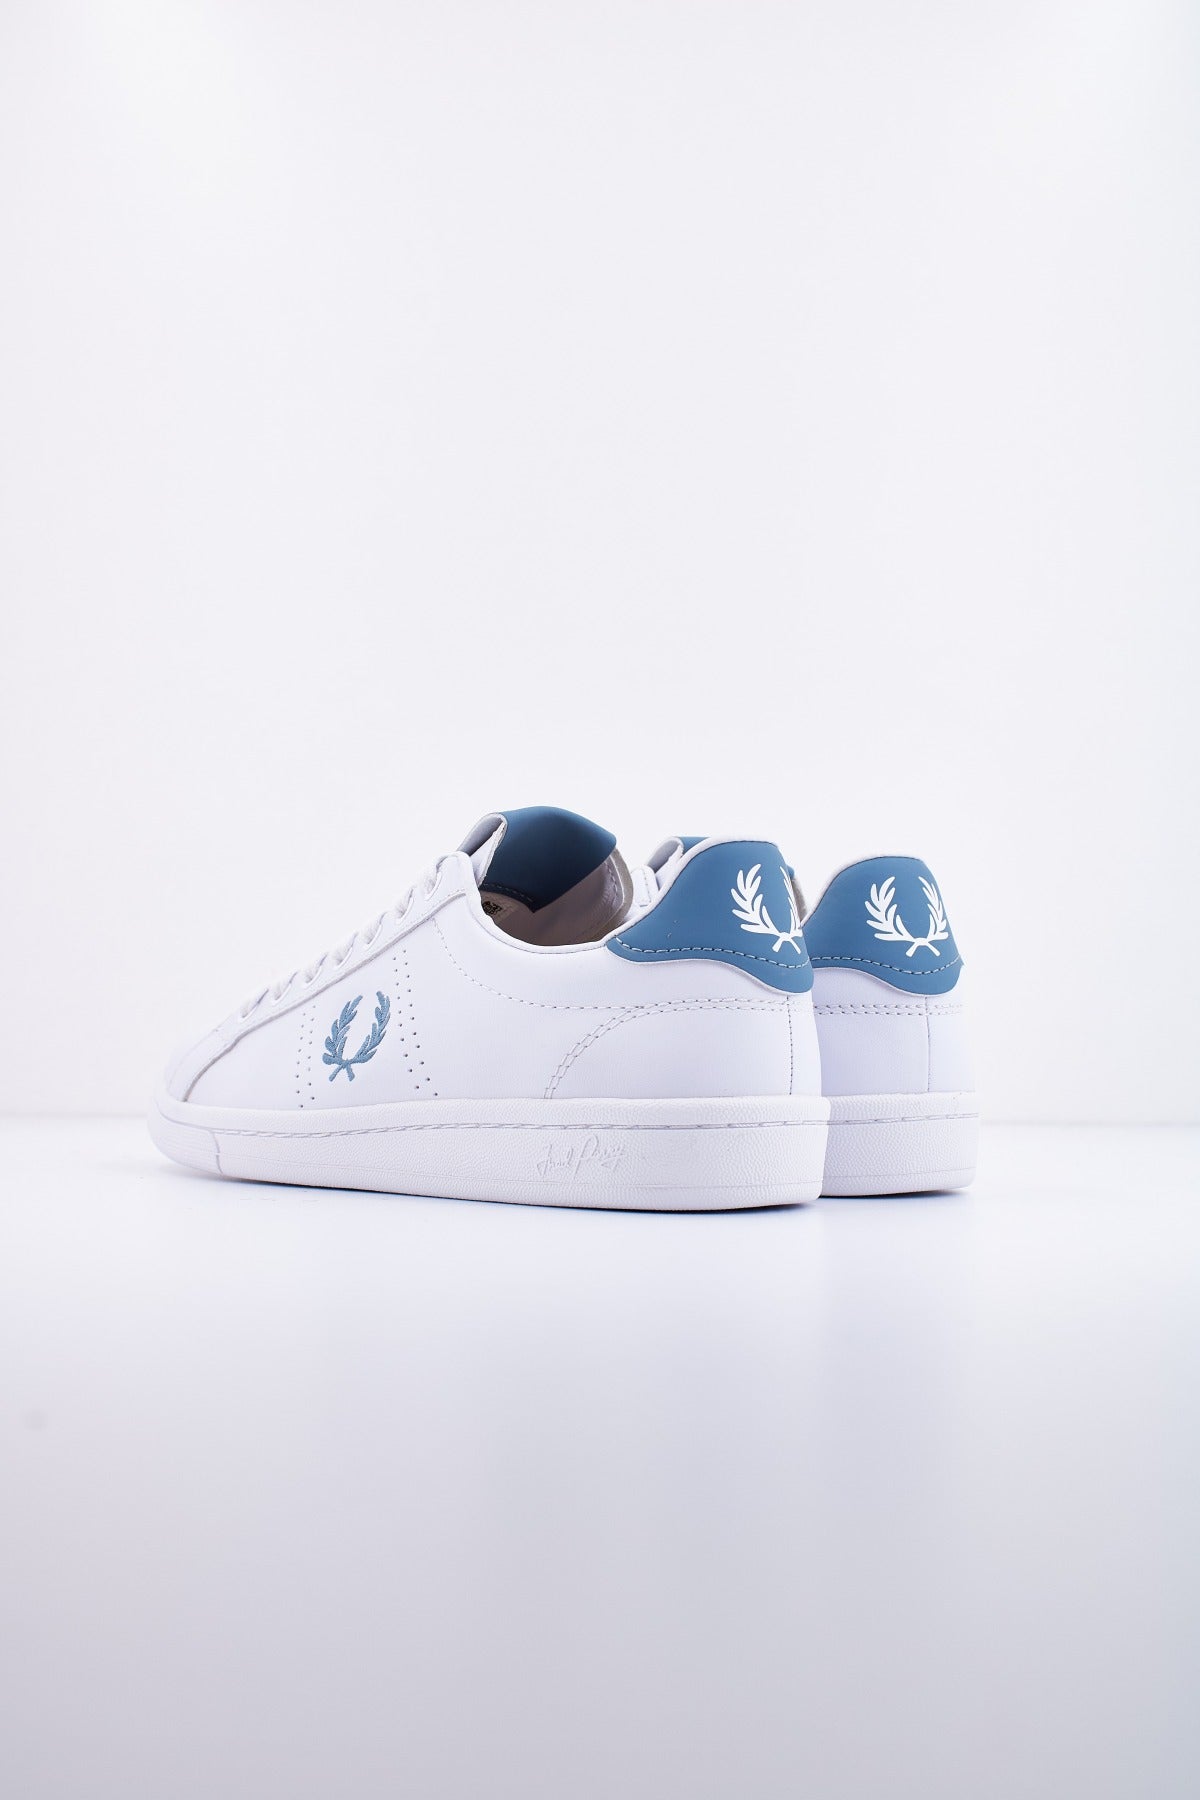 FRED PERRY  LEATHER en color BLANCO  (3)